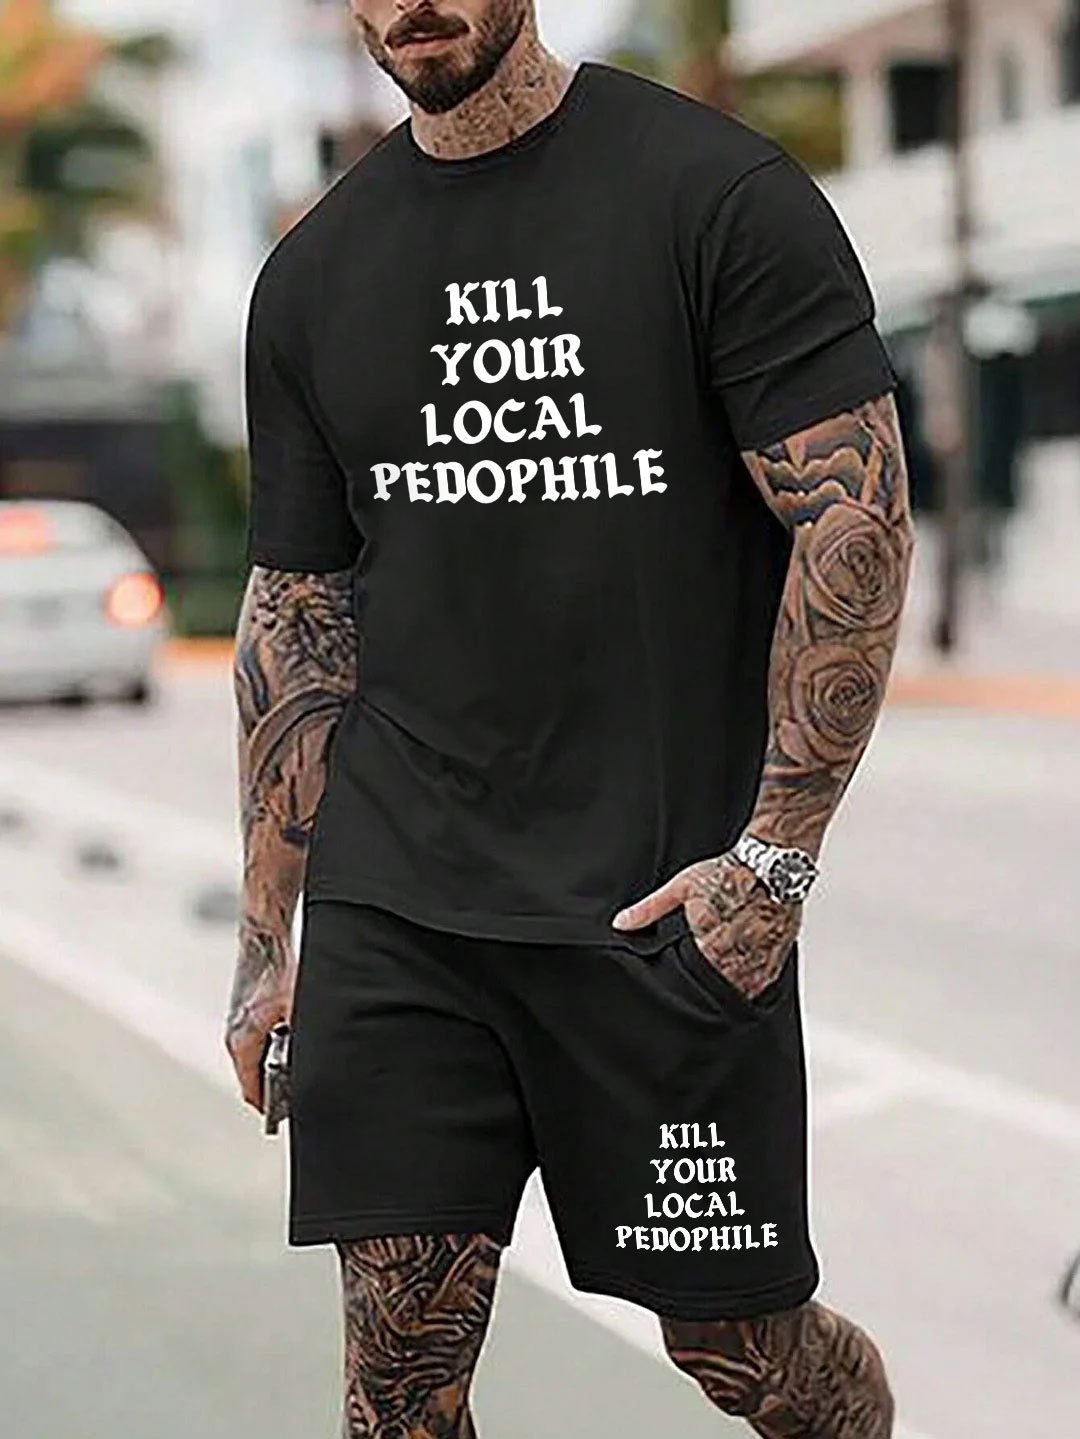 KILL YOUR LOCAL PEDOPHILE Black Printed Suit